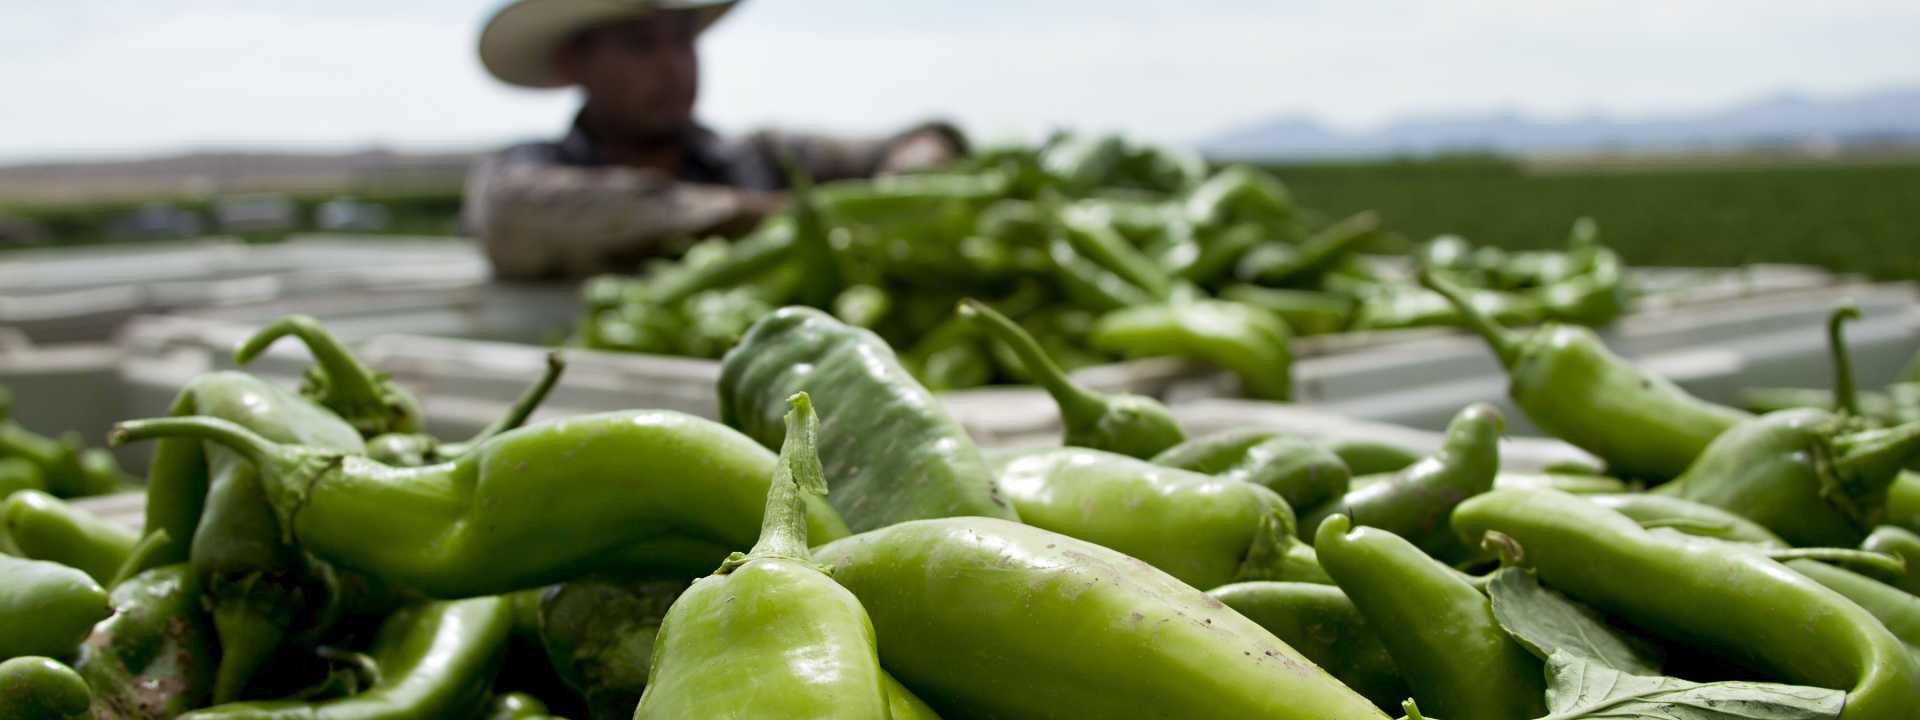 An area farmer admires his harvest of New Mexico green chilies.